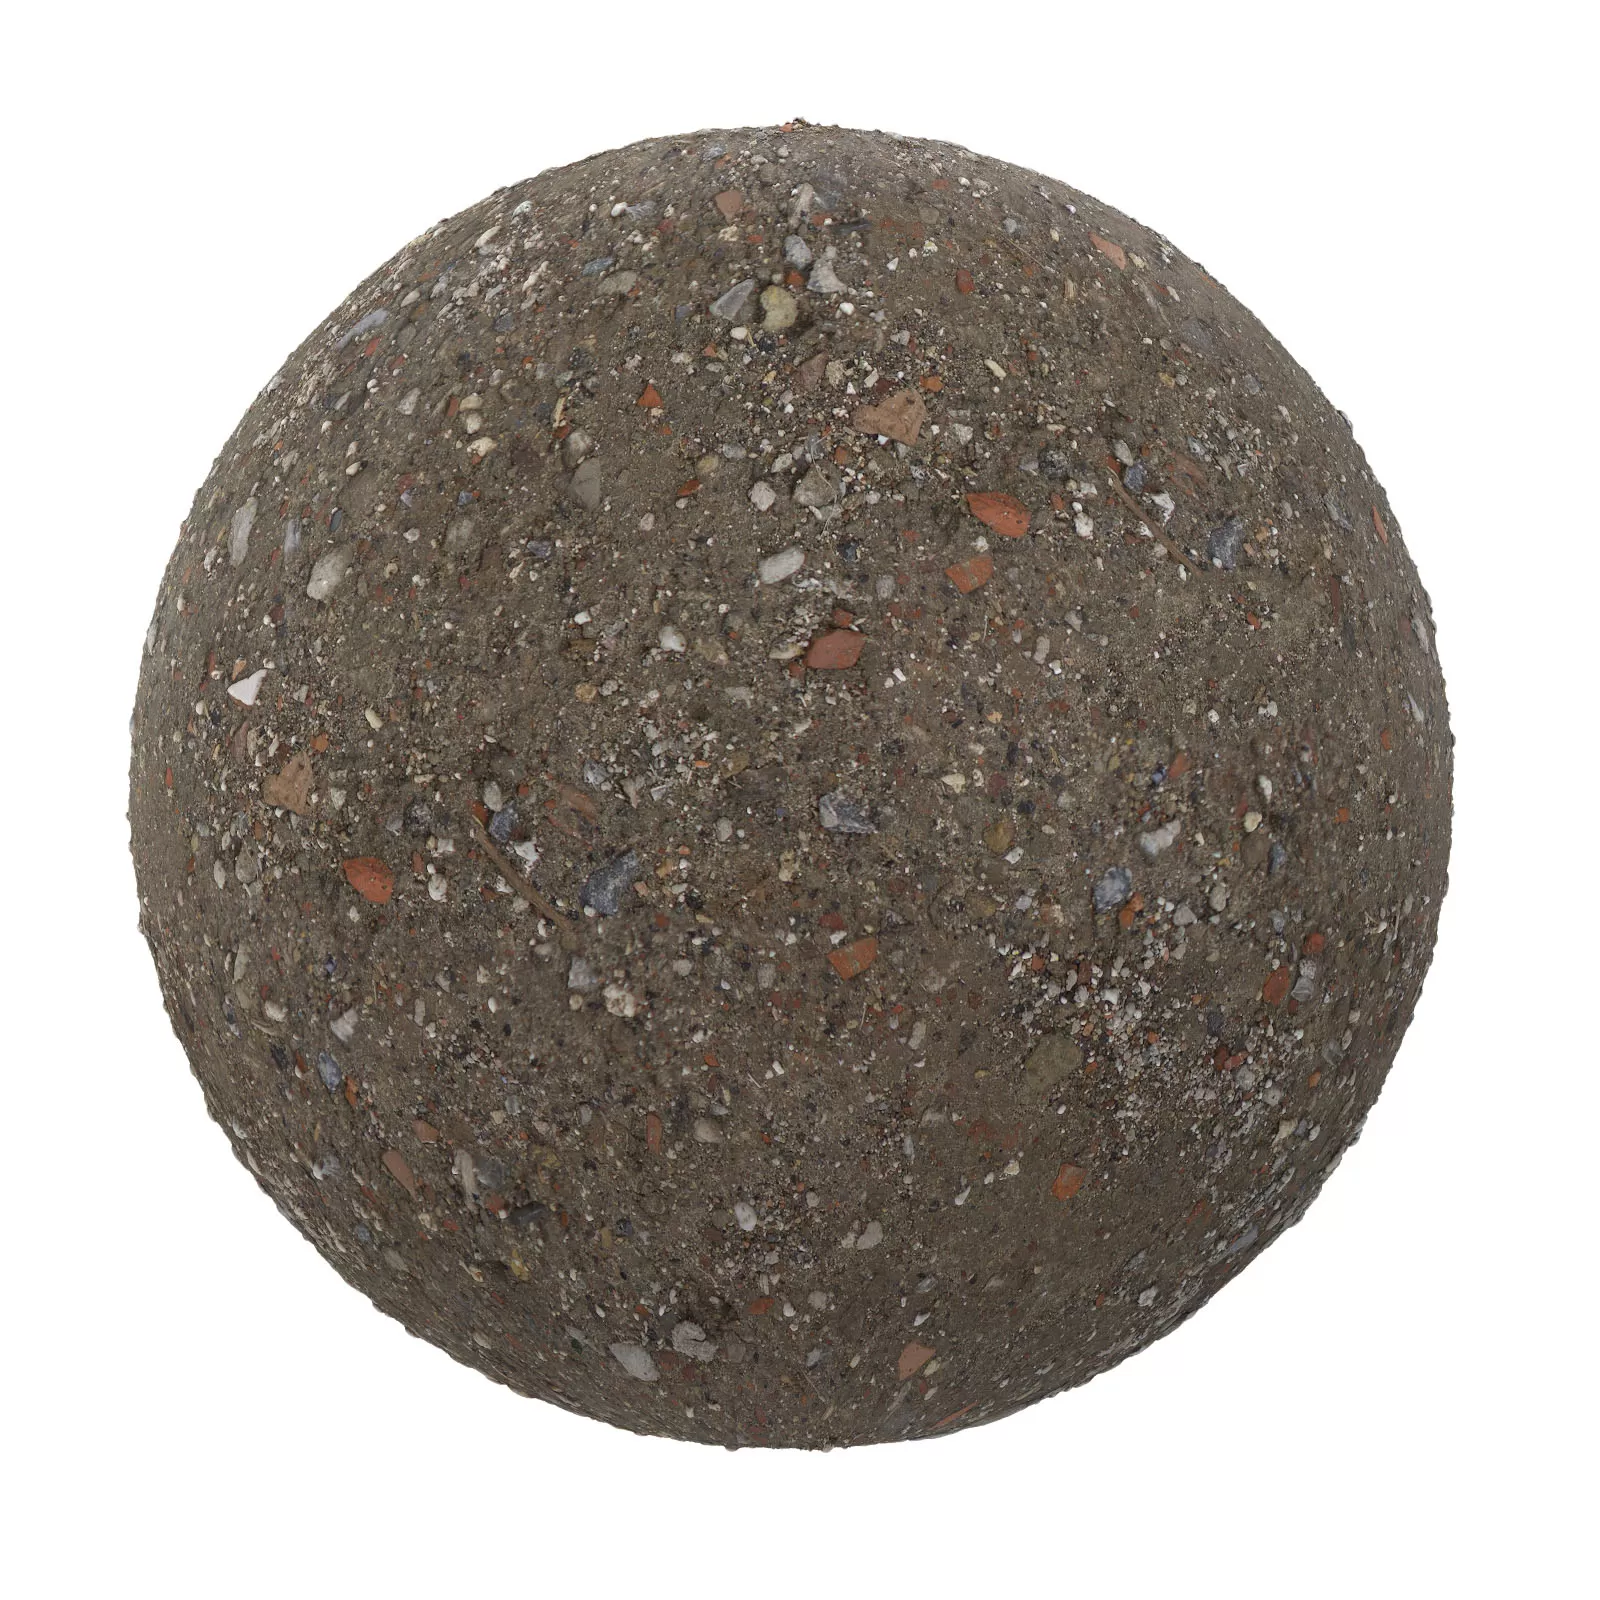 PBR CGAXIS TEXTURES – SOIL – Grey Dirt With Stones 5